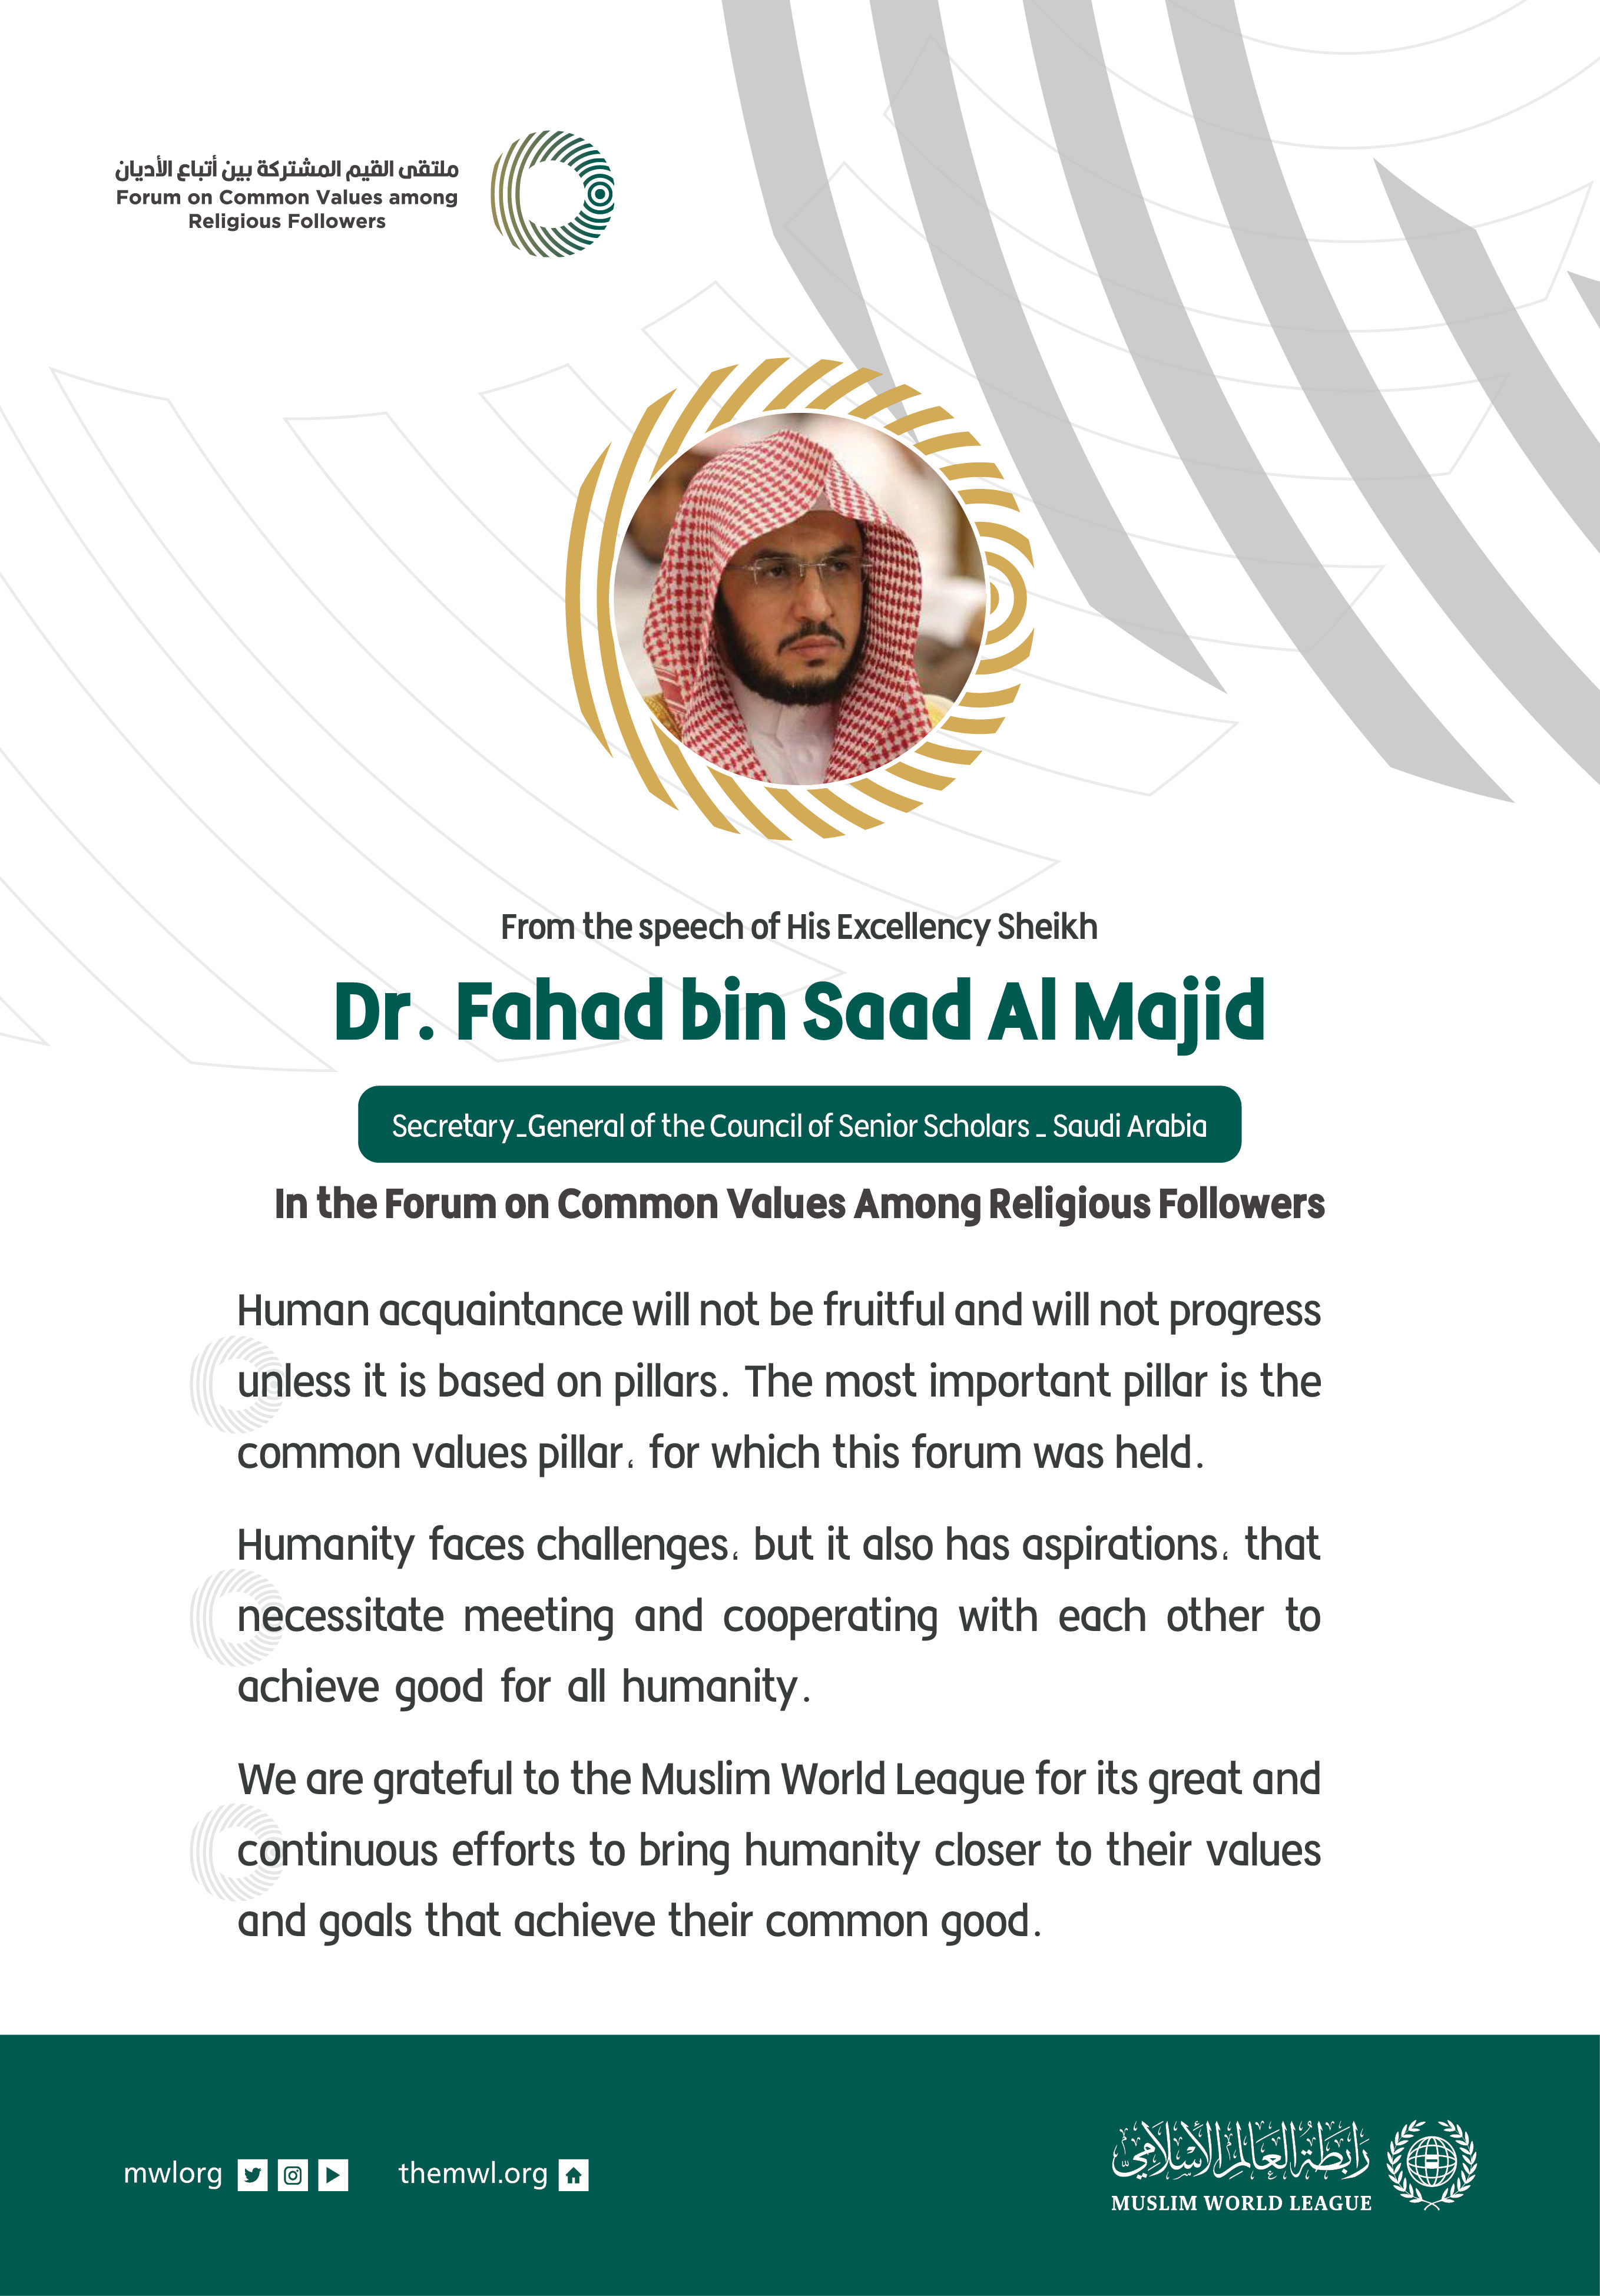 From the speech of His Excellency the Secretary-General of the Council of Senior Scholars in Saudi Arabia, Sheikh Dr. Fahad bin Saad Al Majid, in the Forum on Common Values Among Religious Followers in Riyadh: 